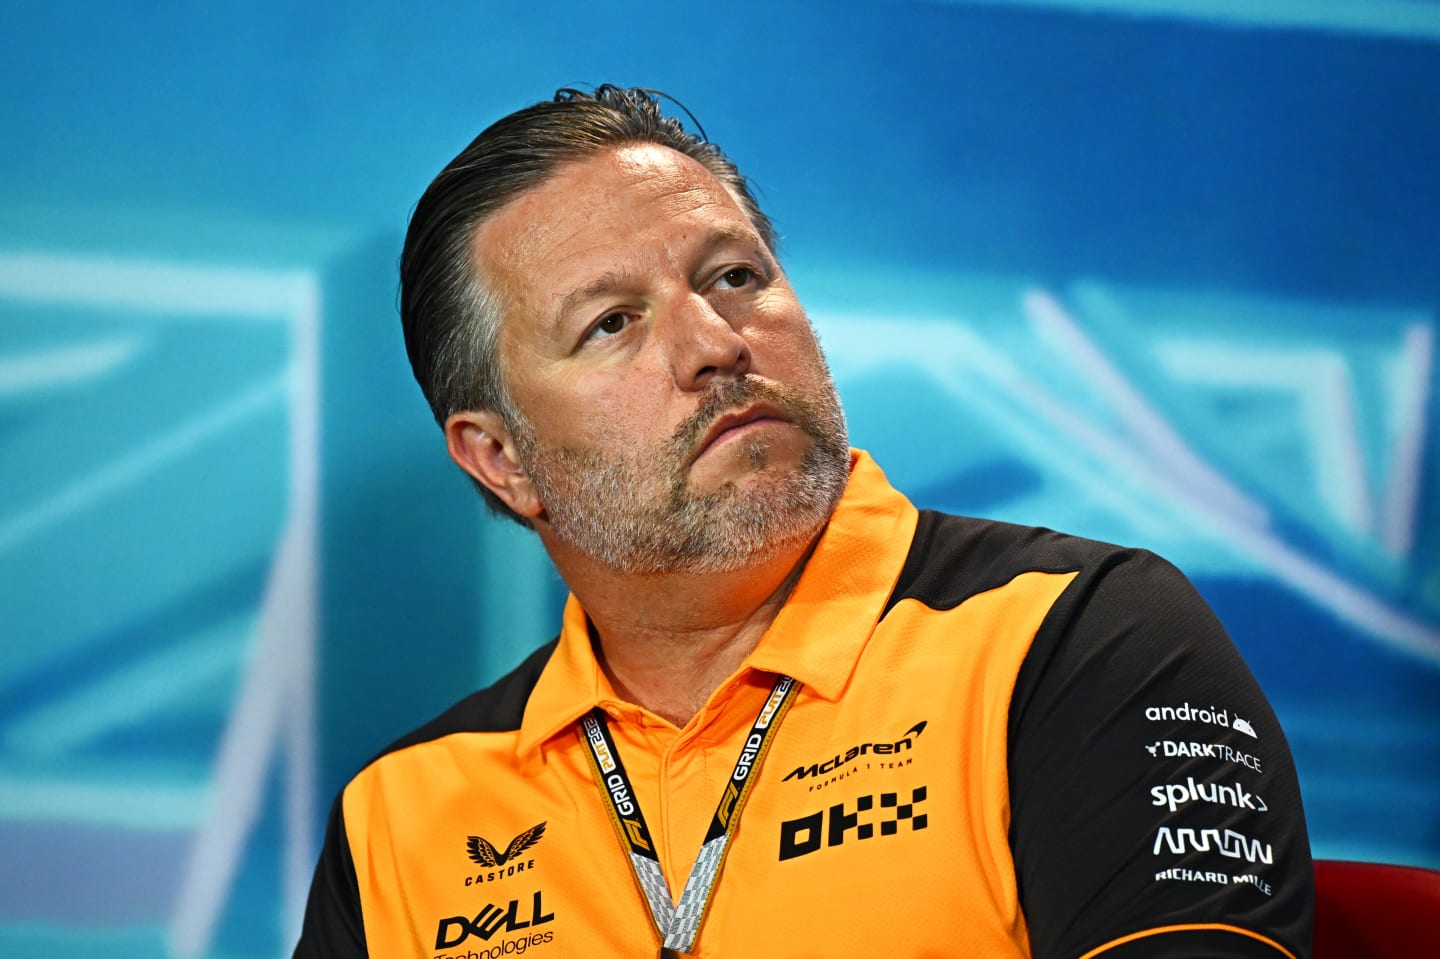 MIAMI, FLORIDA - MAY 07: McLaren Chief Executive Officer Zak Brown talks in the Team Principals Press Conference prior to final practice ahead of the F1 Grand Prix of Miami at the Miami International Autodrome on May 07, 2022 in Miami, Florida. (Photo by Clive Mason/Getty Images)